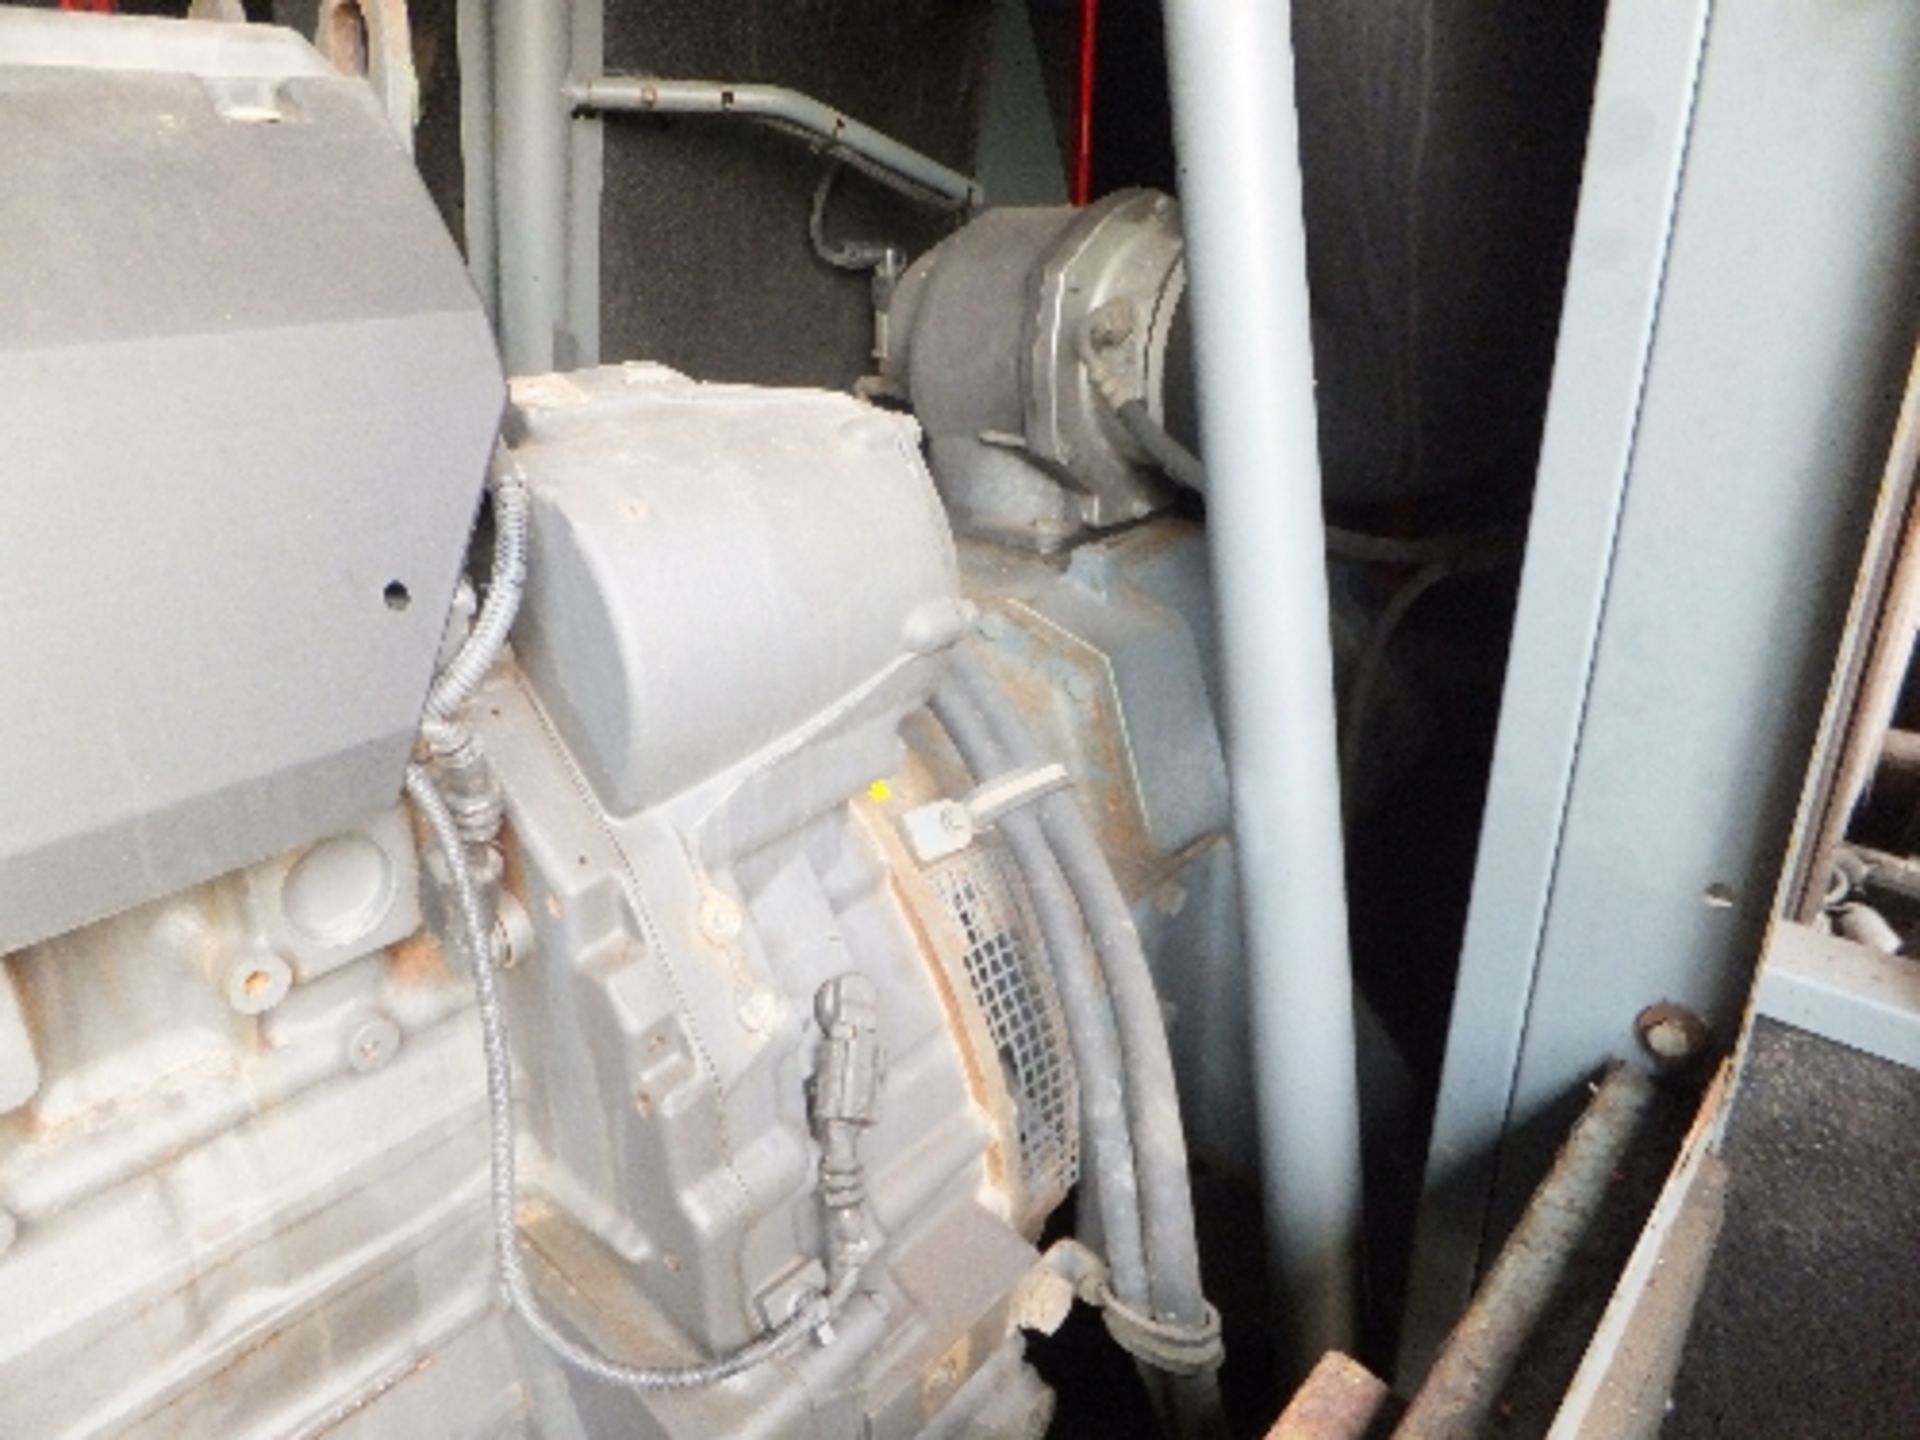 Atlas Copco XAHS 416 compressor (2005) Turns over, common rail fuel issue - Image 11 of 11